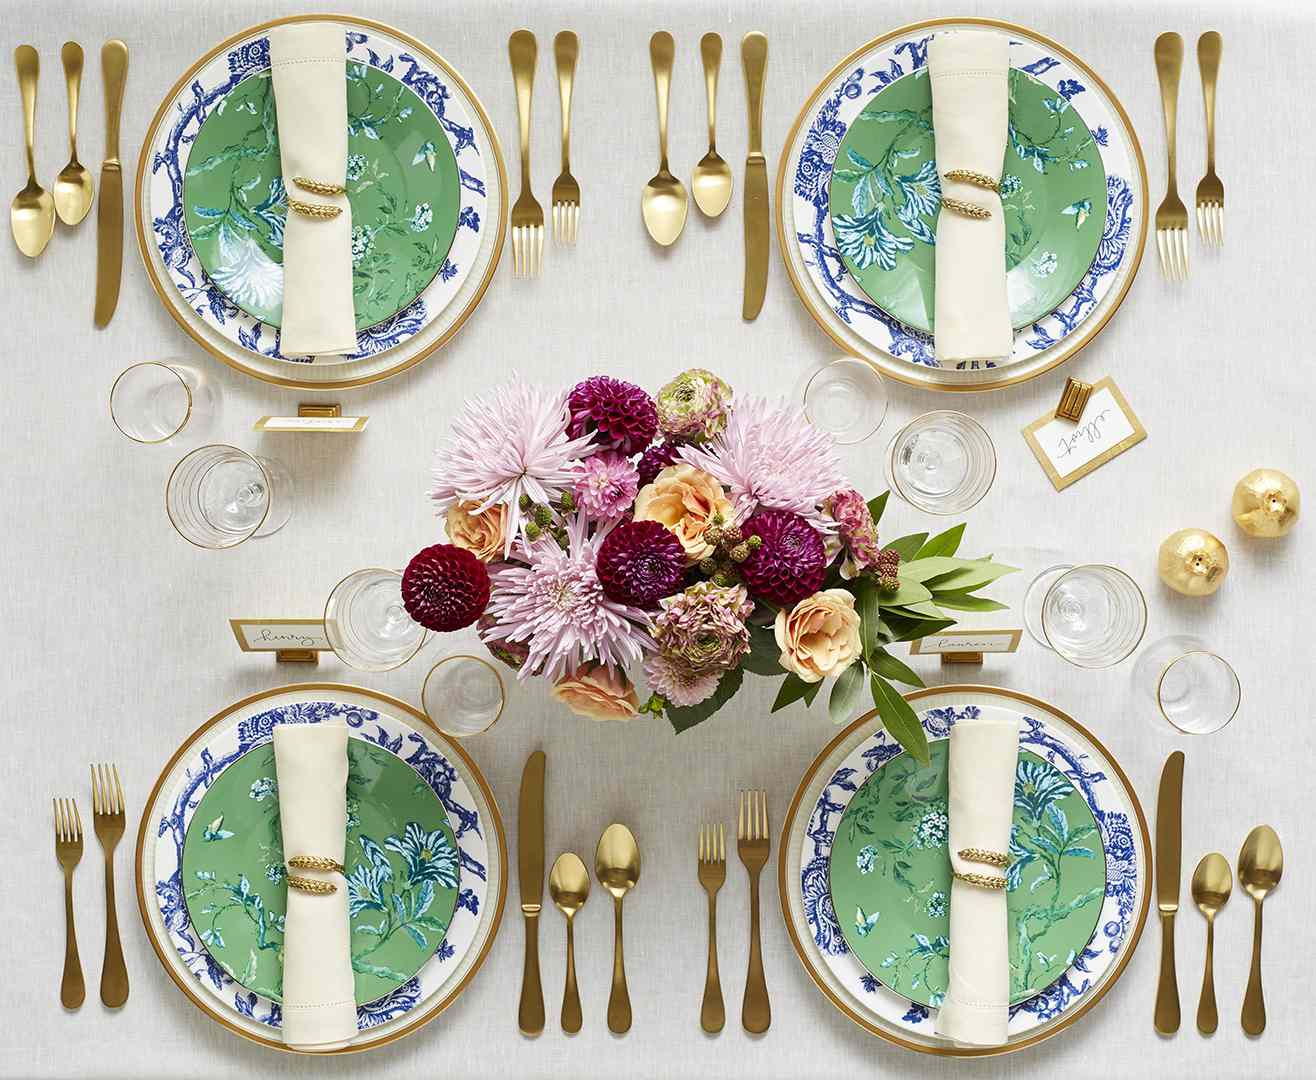 formal table setting with green, blue and gold